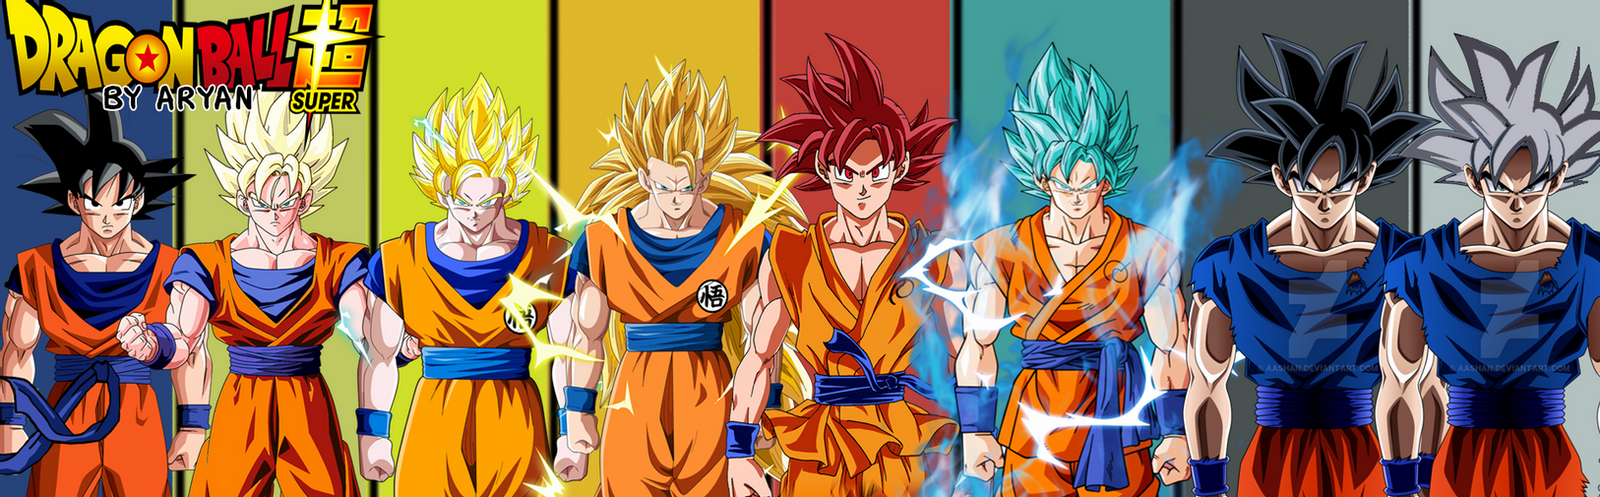 Goku In Every Form Wallpapers - Wallpaper Cave